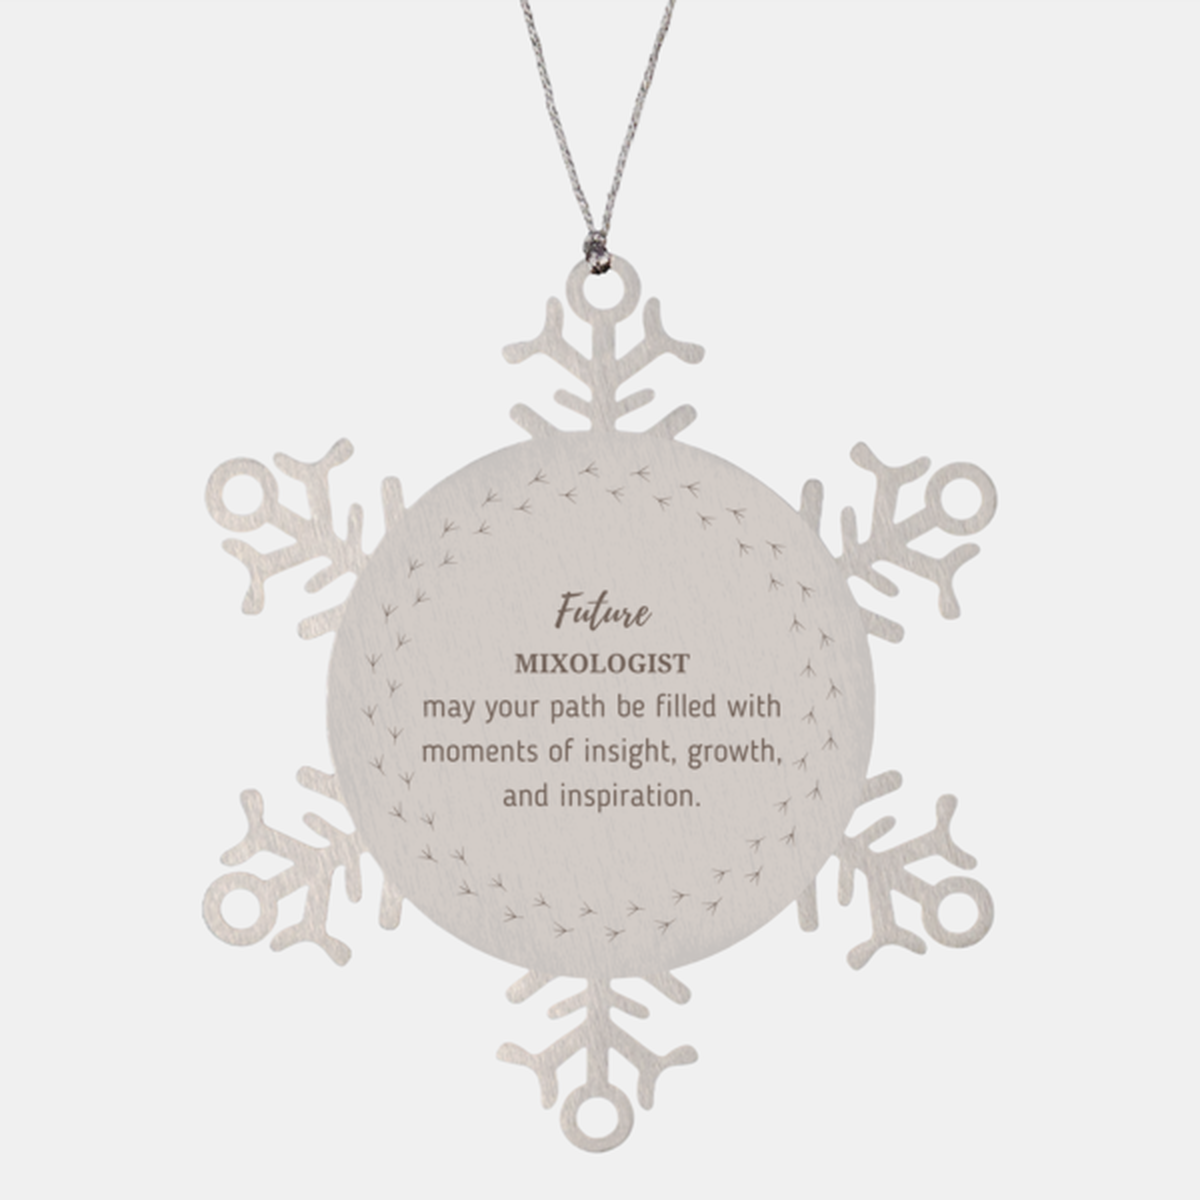 Future Mixologist Gifts, May your path be filled with moments of insight, Graduation Gifts for New Mixologist, Christmas Unique Snowflake Ornament For Men, Women, Friends